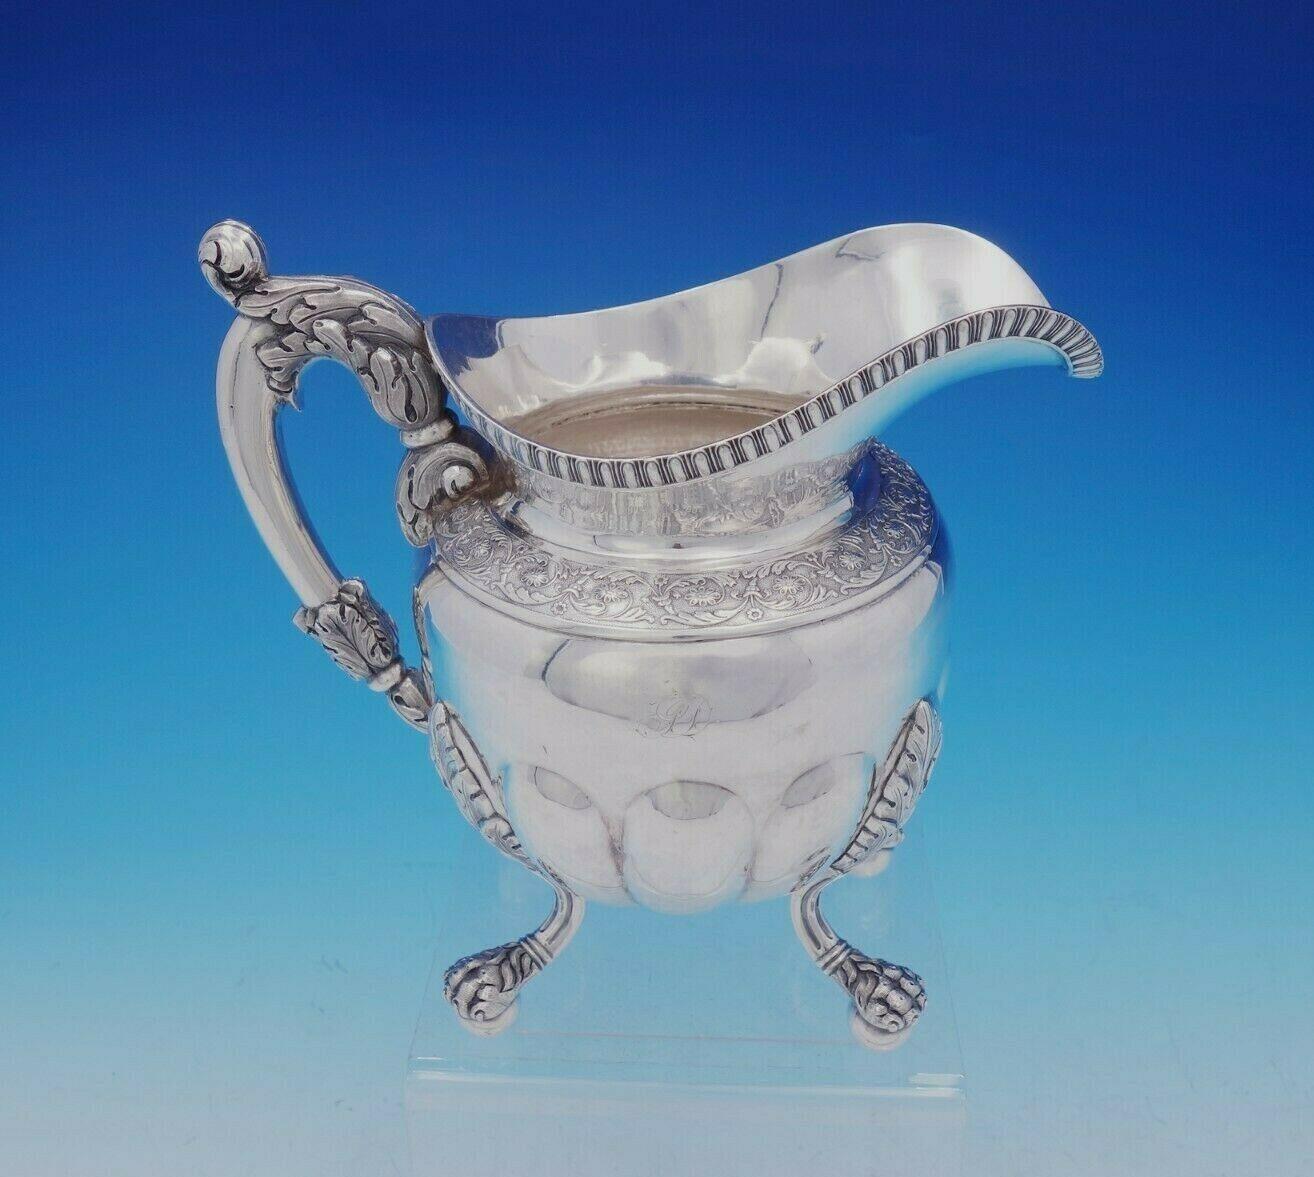 William Thomson Coin Silver Tea Set 4pc with Floral and Acanthus Leaf Motif 5